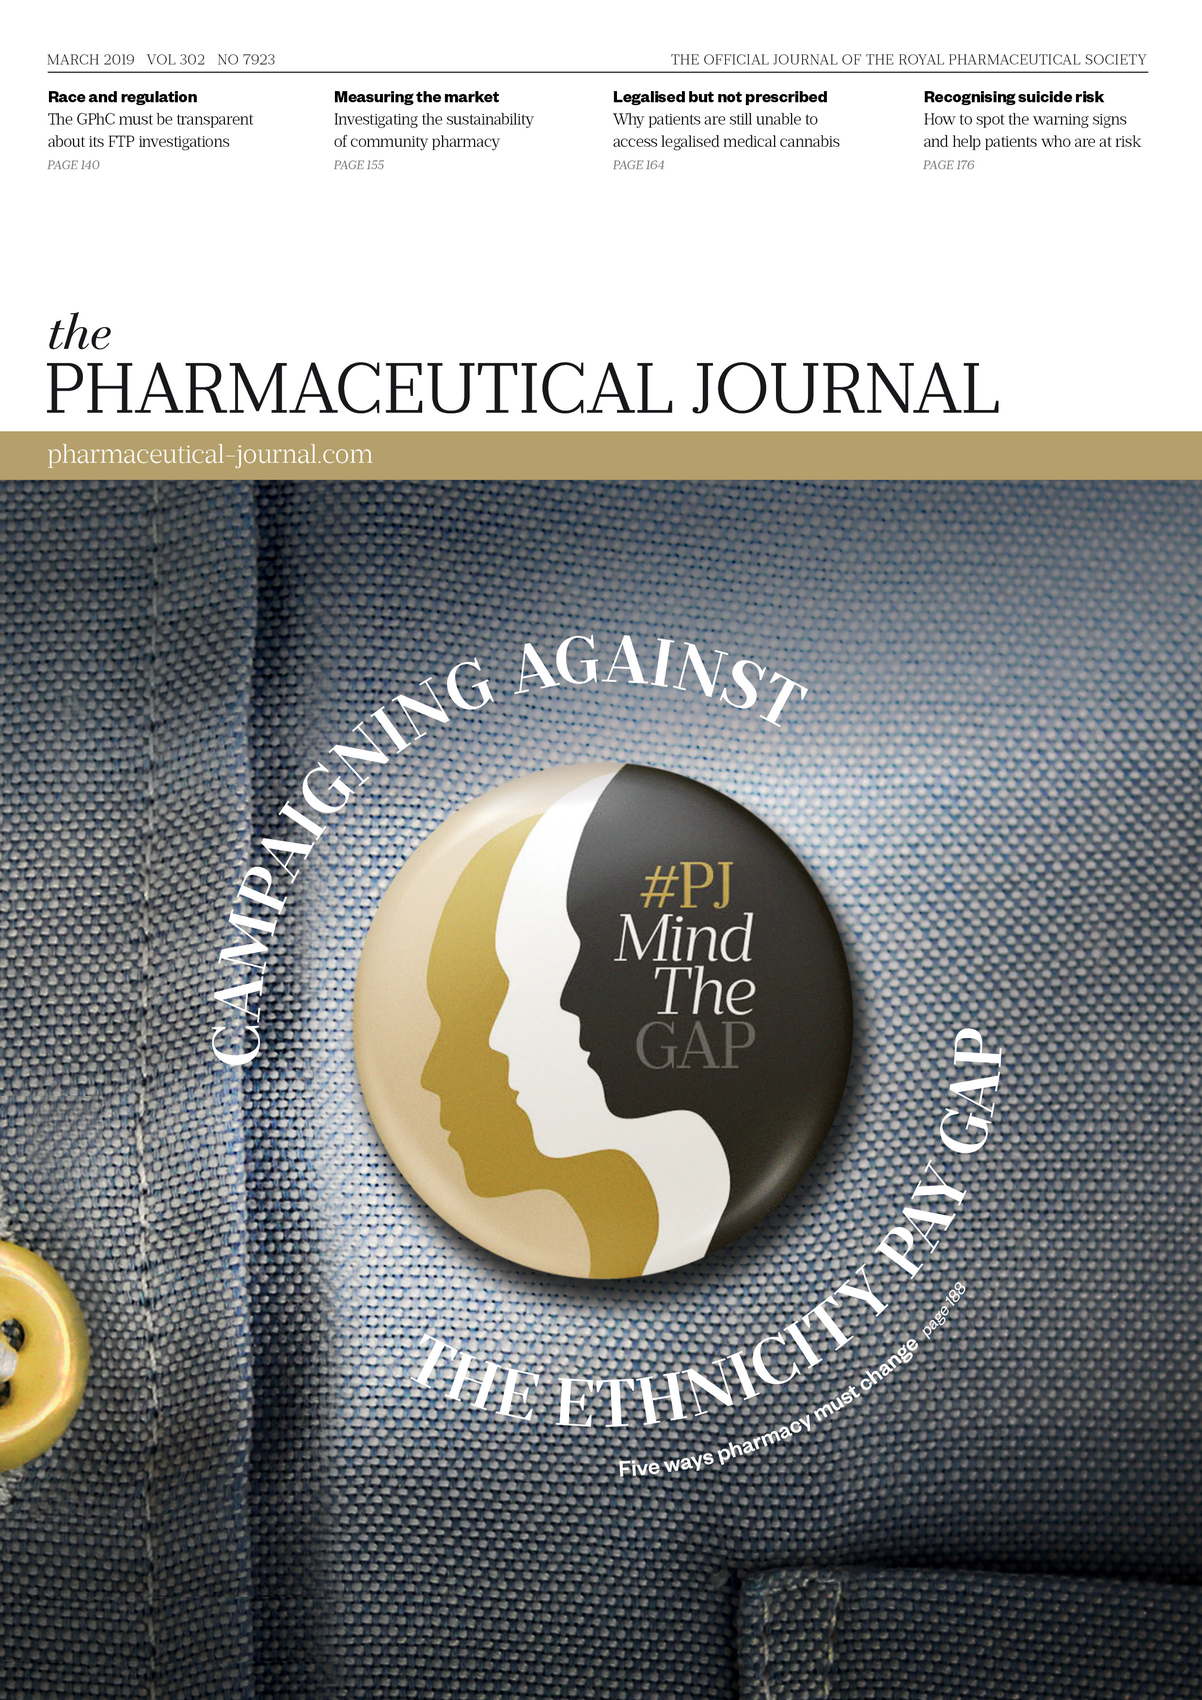 Publication issue cover for PJ, March 2019, Vol 302, No 7923